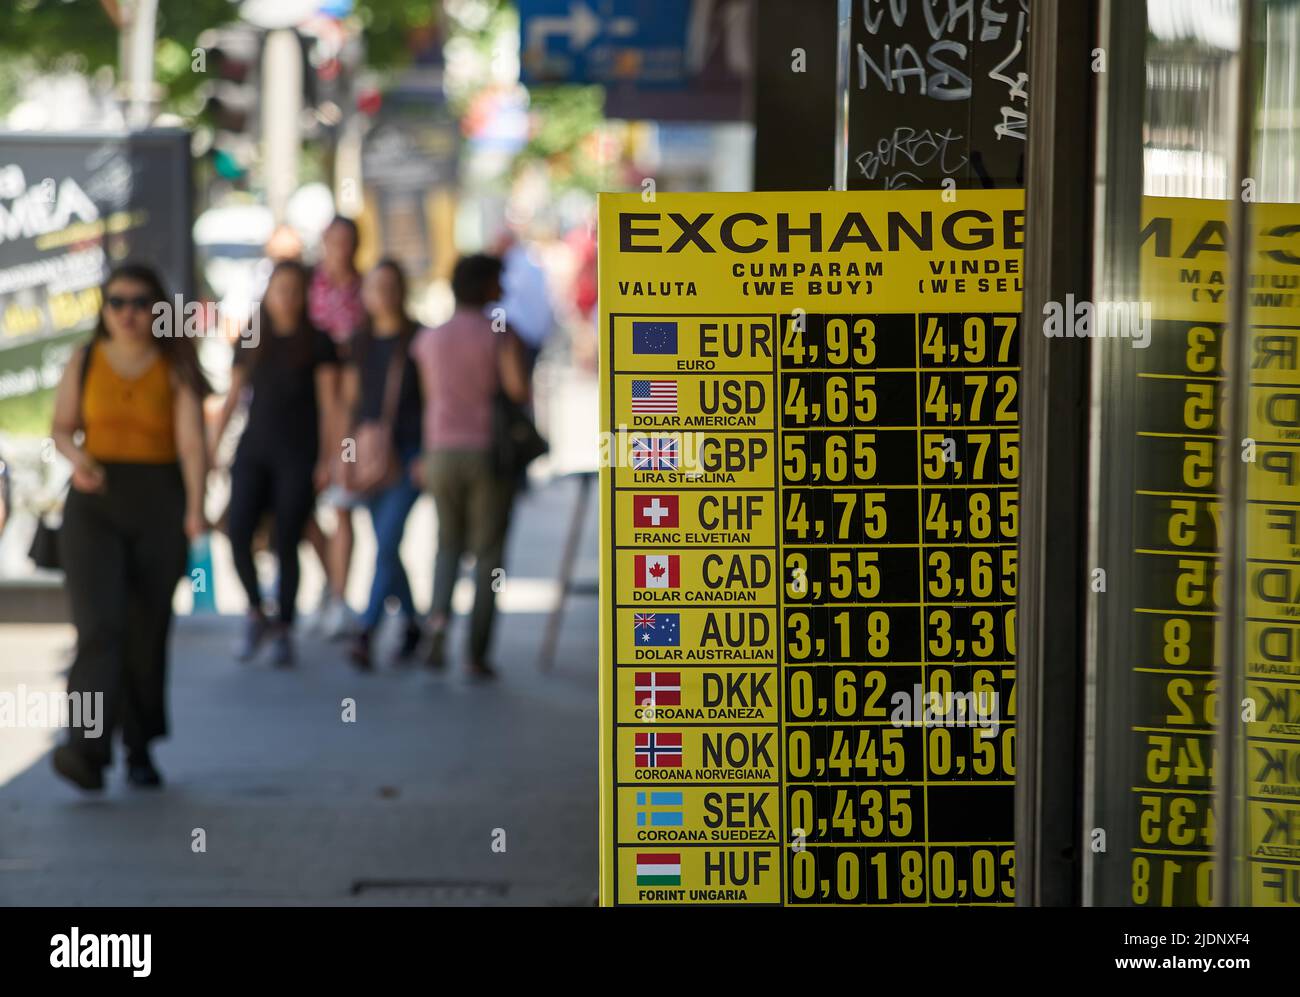 Bucharest, Romania - June 22, 2022: The exchange rate of the Leu-Euro, near the psychological threshold of 5 lei, is displayed on a yellow board at th Stock Photo